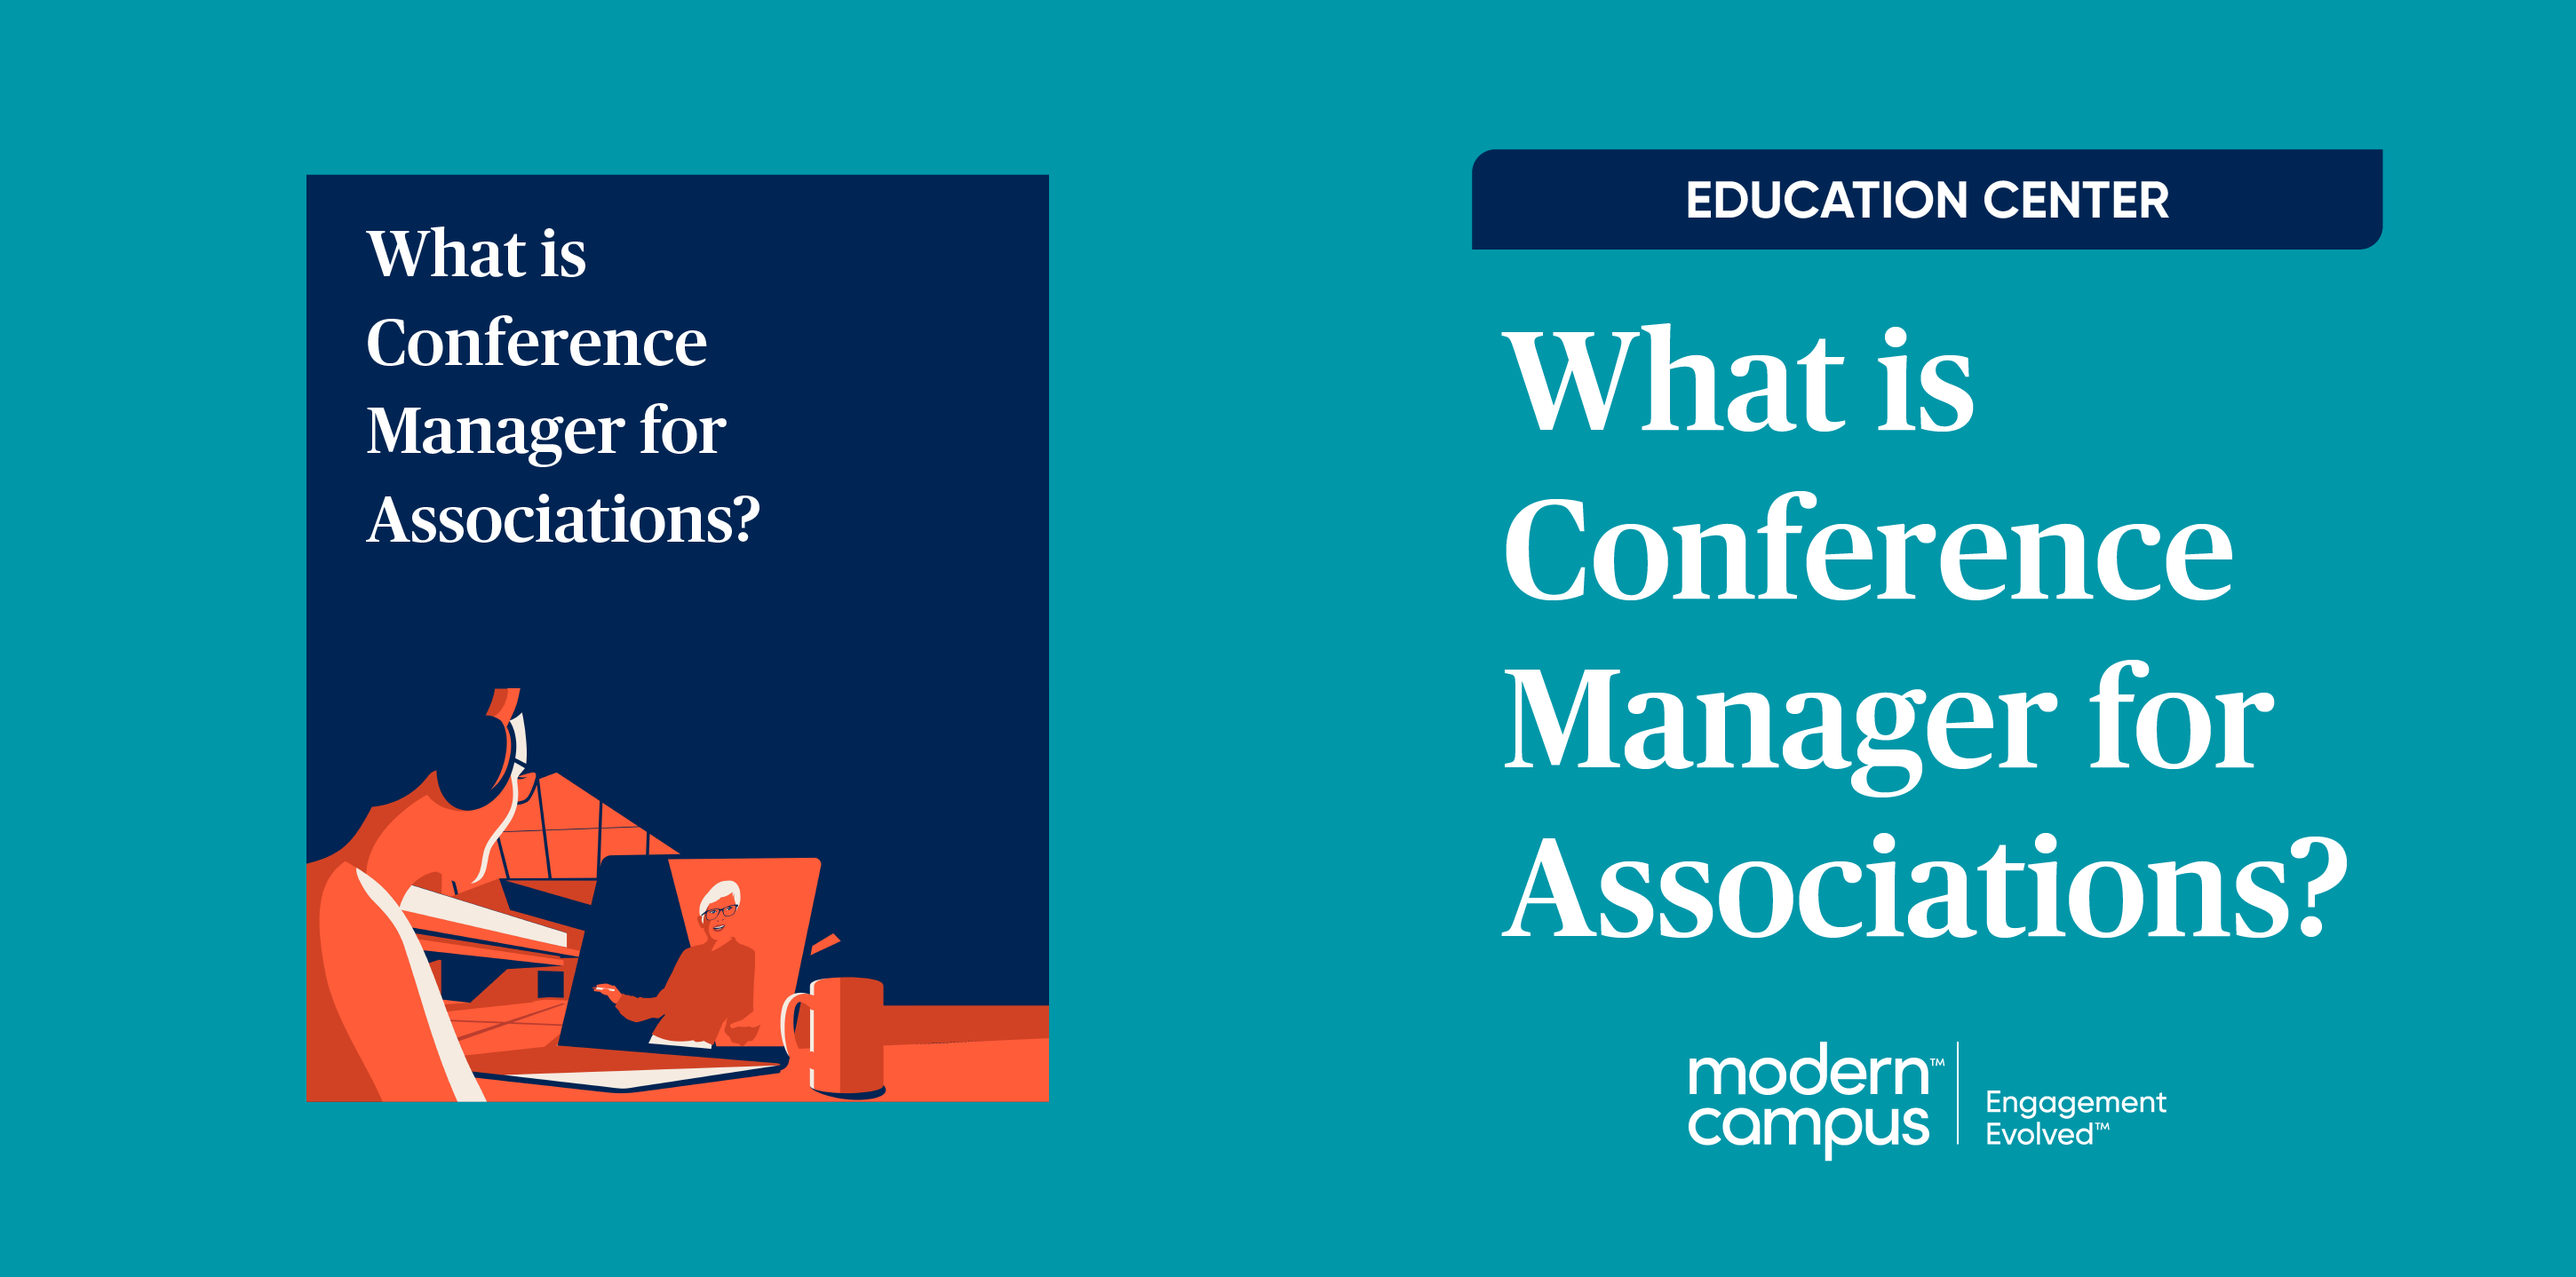 What Is Conference Manager for Associations?